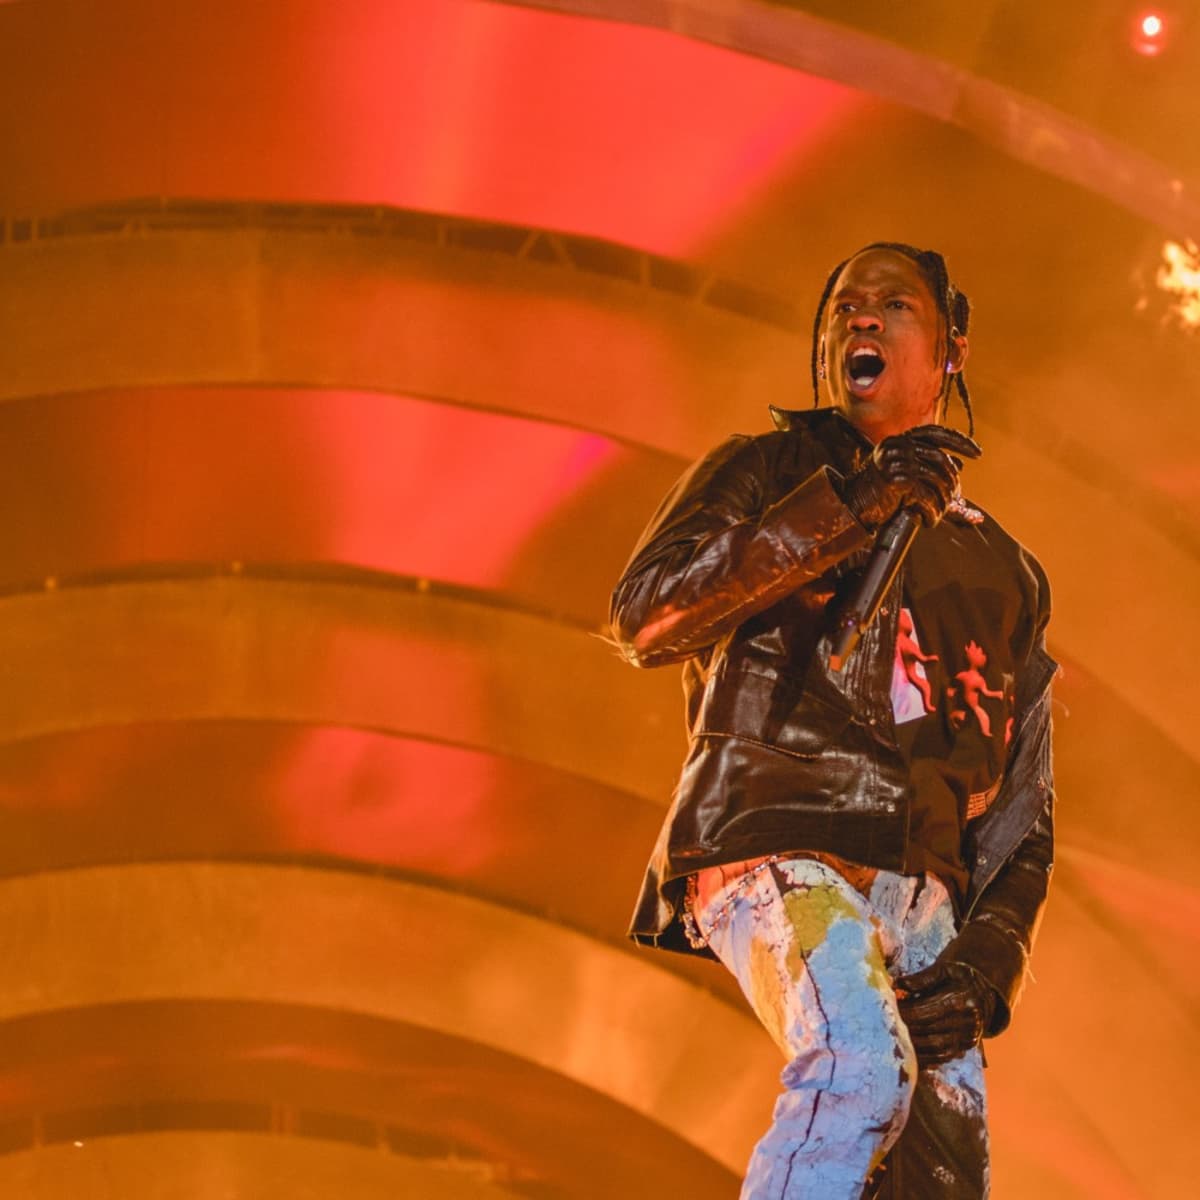 Travis Scott's AstroWorld Festival Ends in Tragedy With Eight Dead